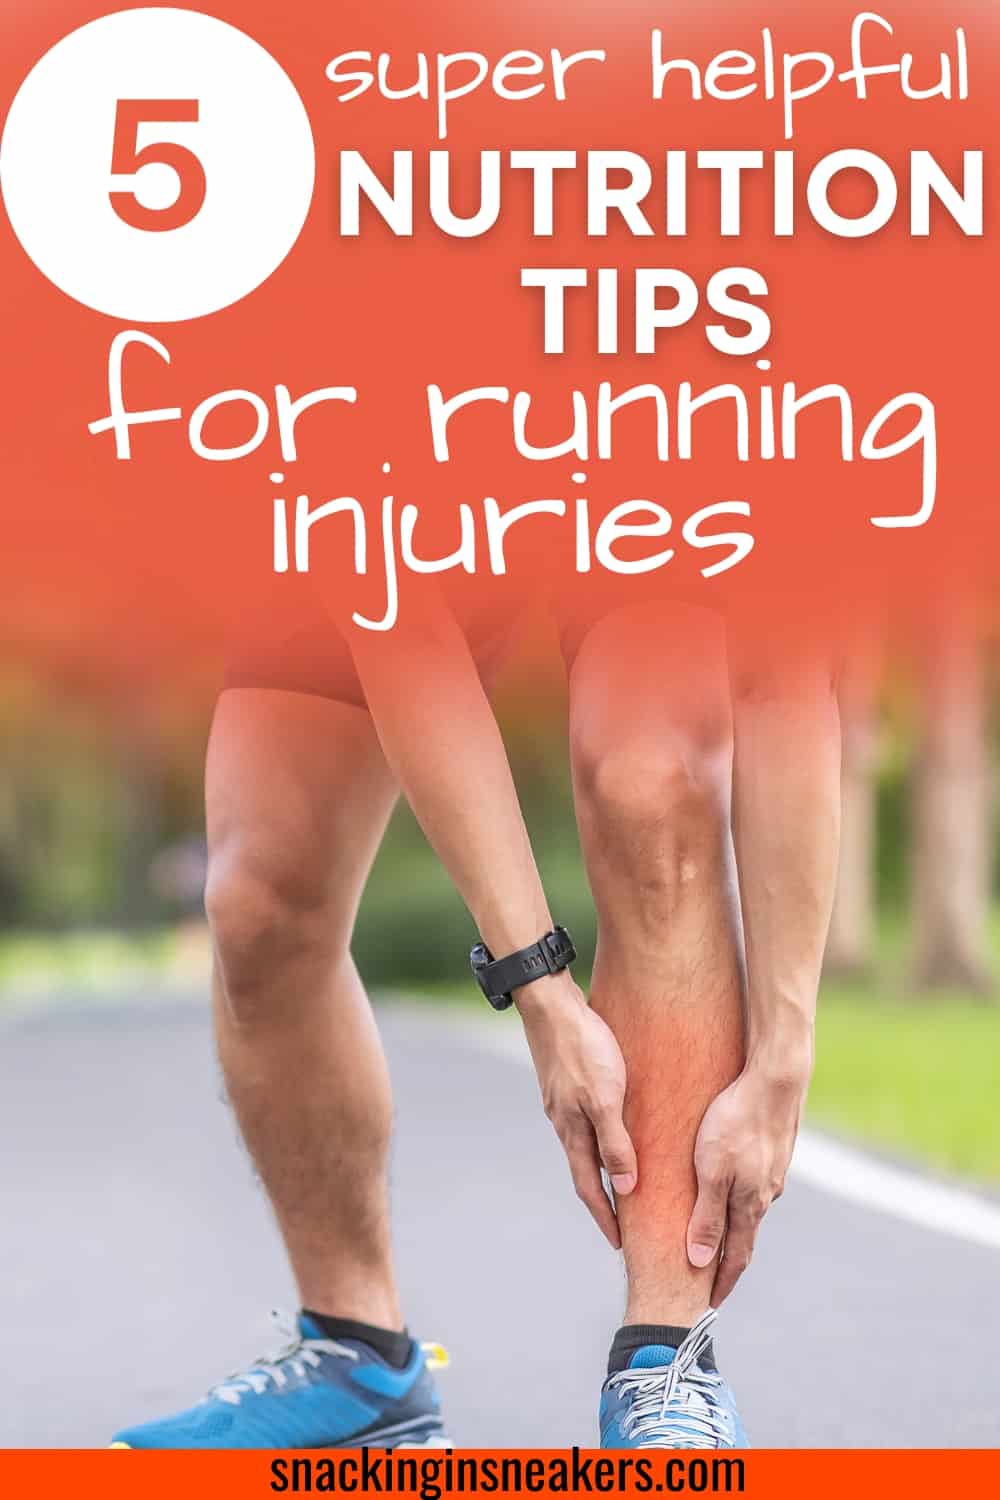 A man clutching his calf with a running injury, with a text overlay that says 5 super helpful nutrition tips for running injuries.